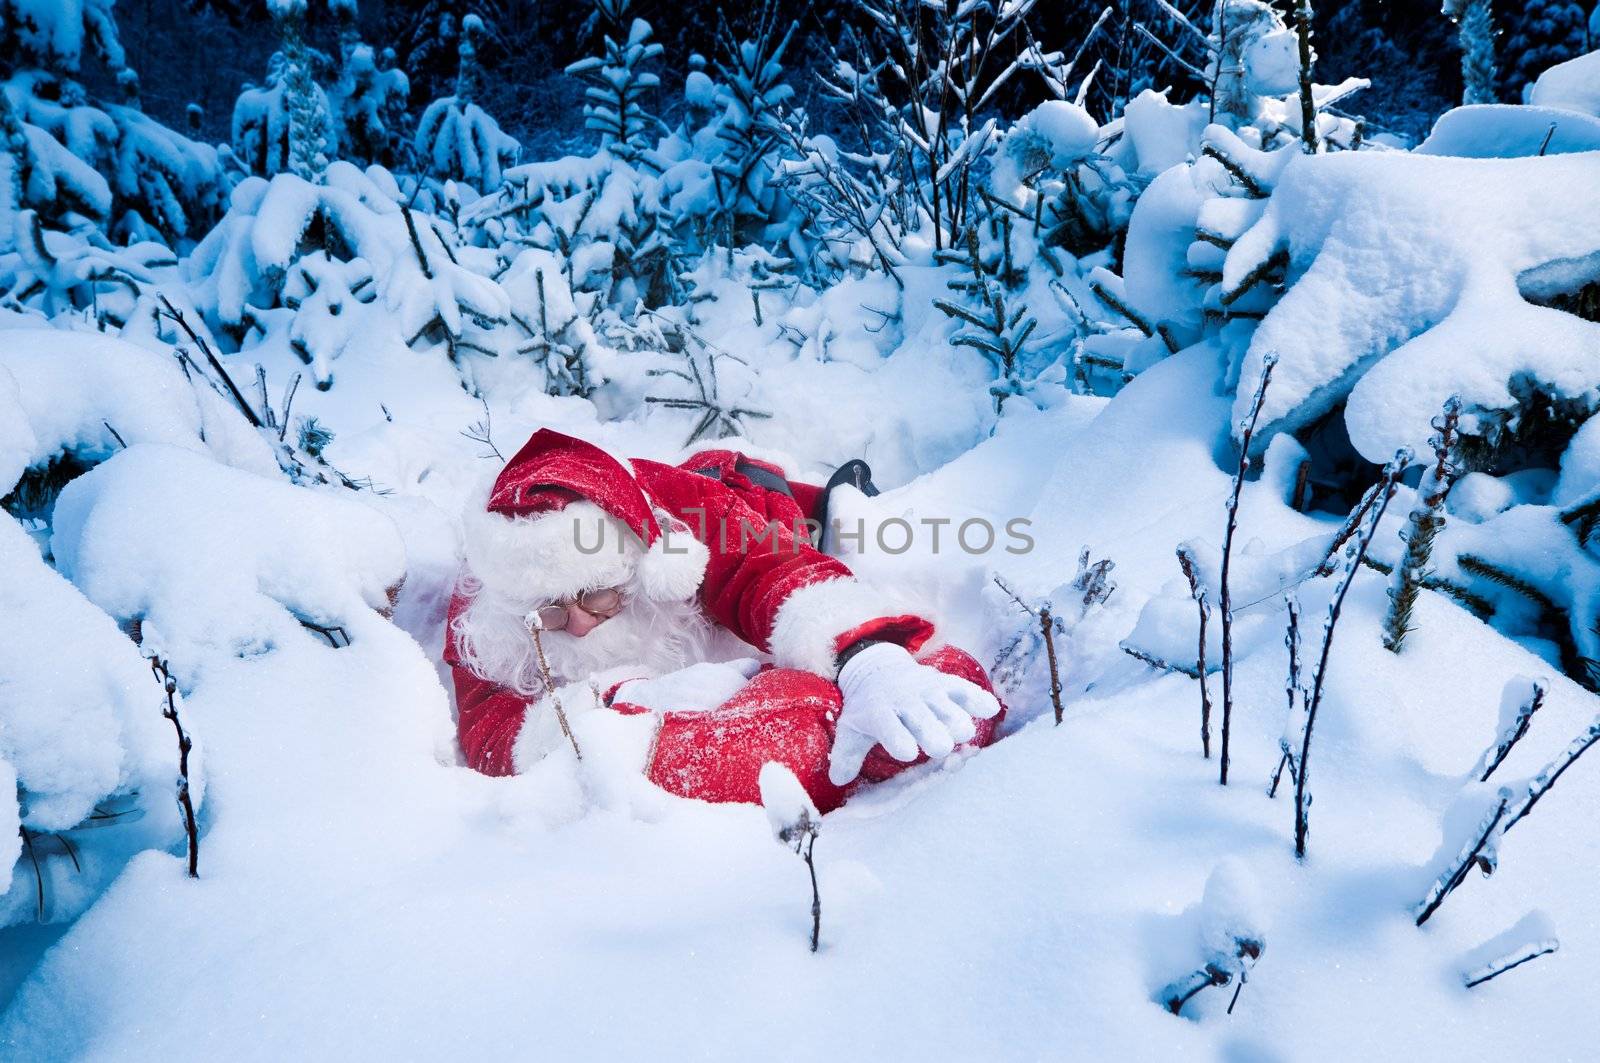 Santa struggling to deliver presents. He seems stuck in deep snow